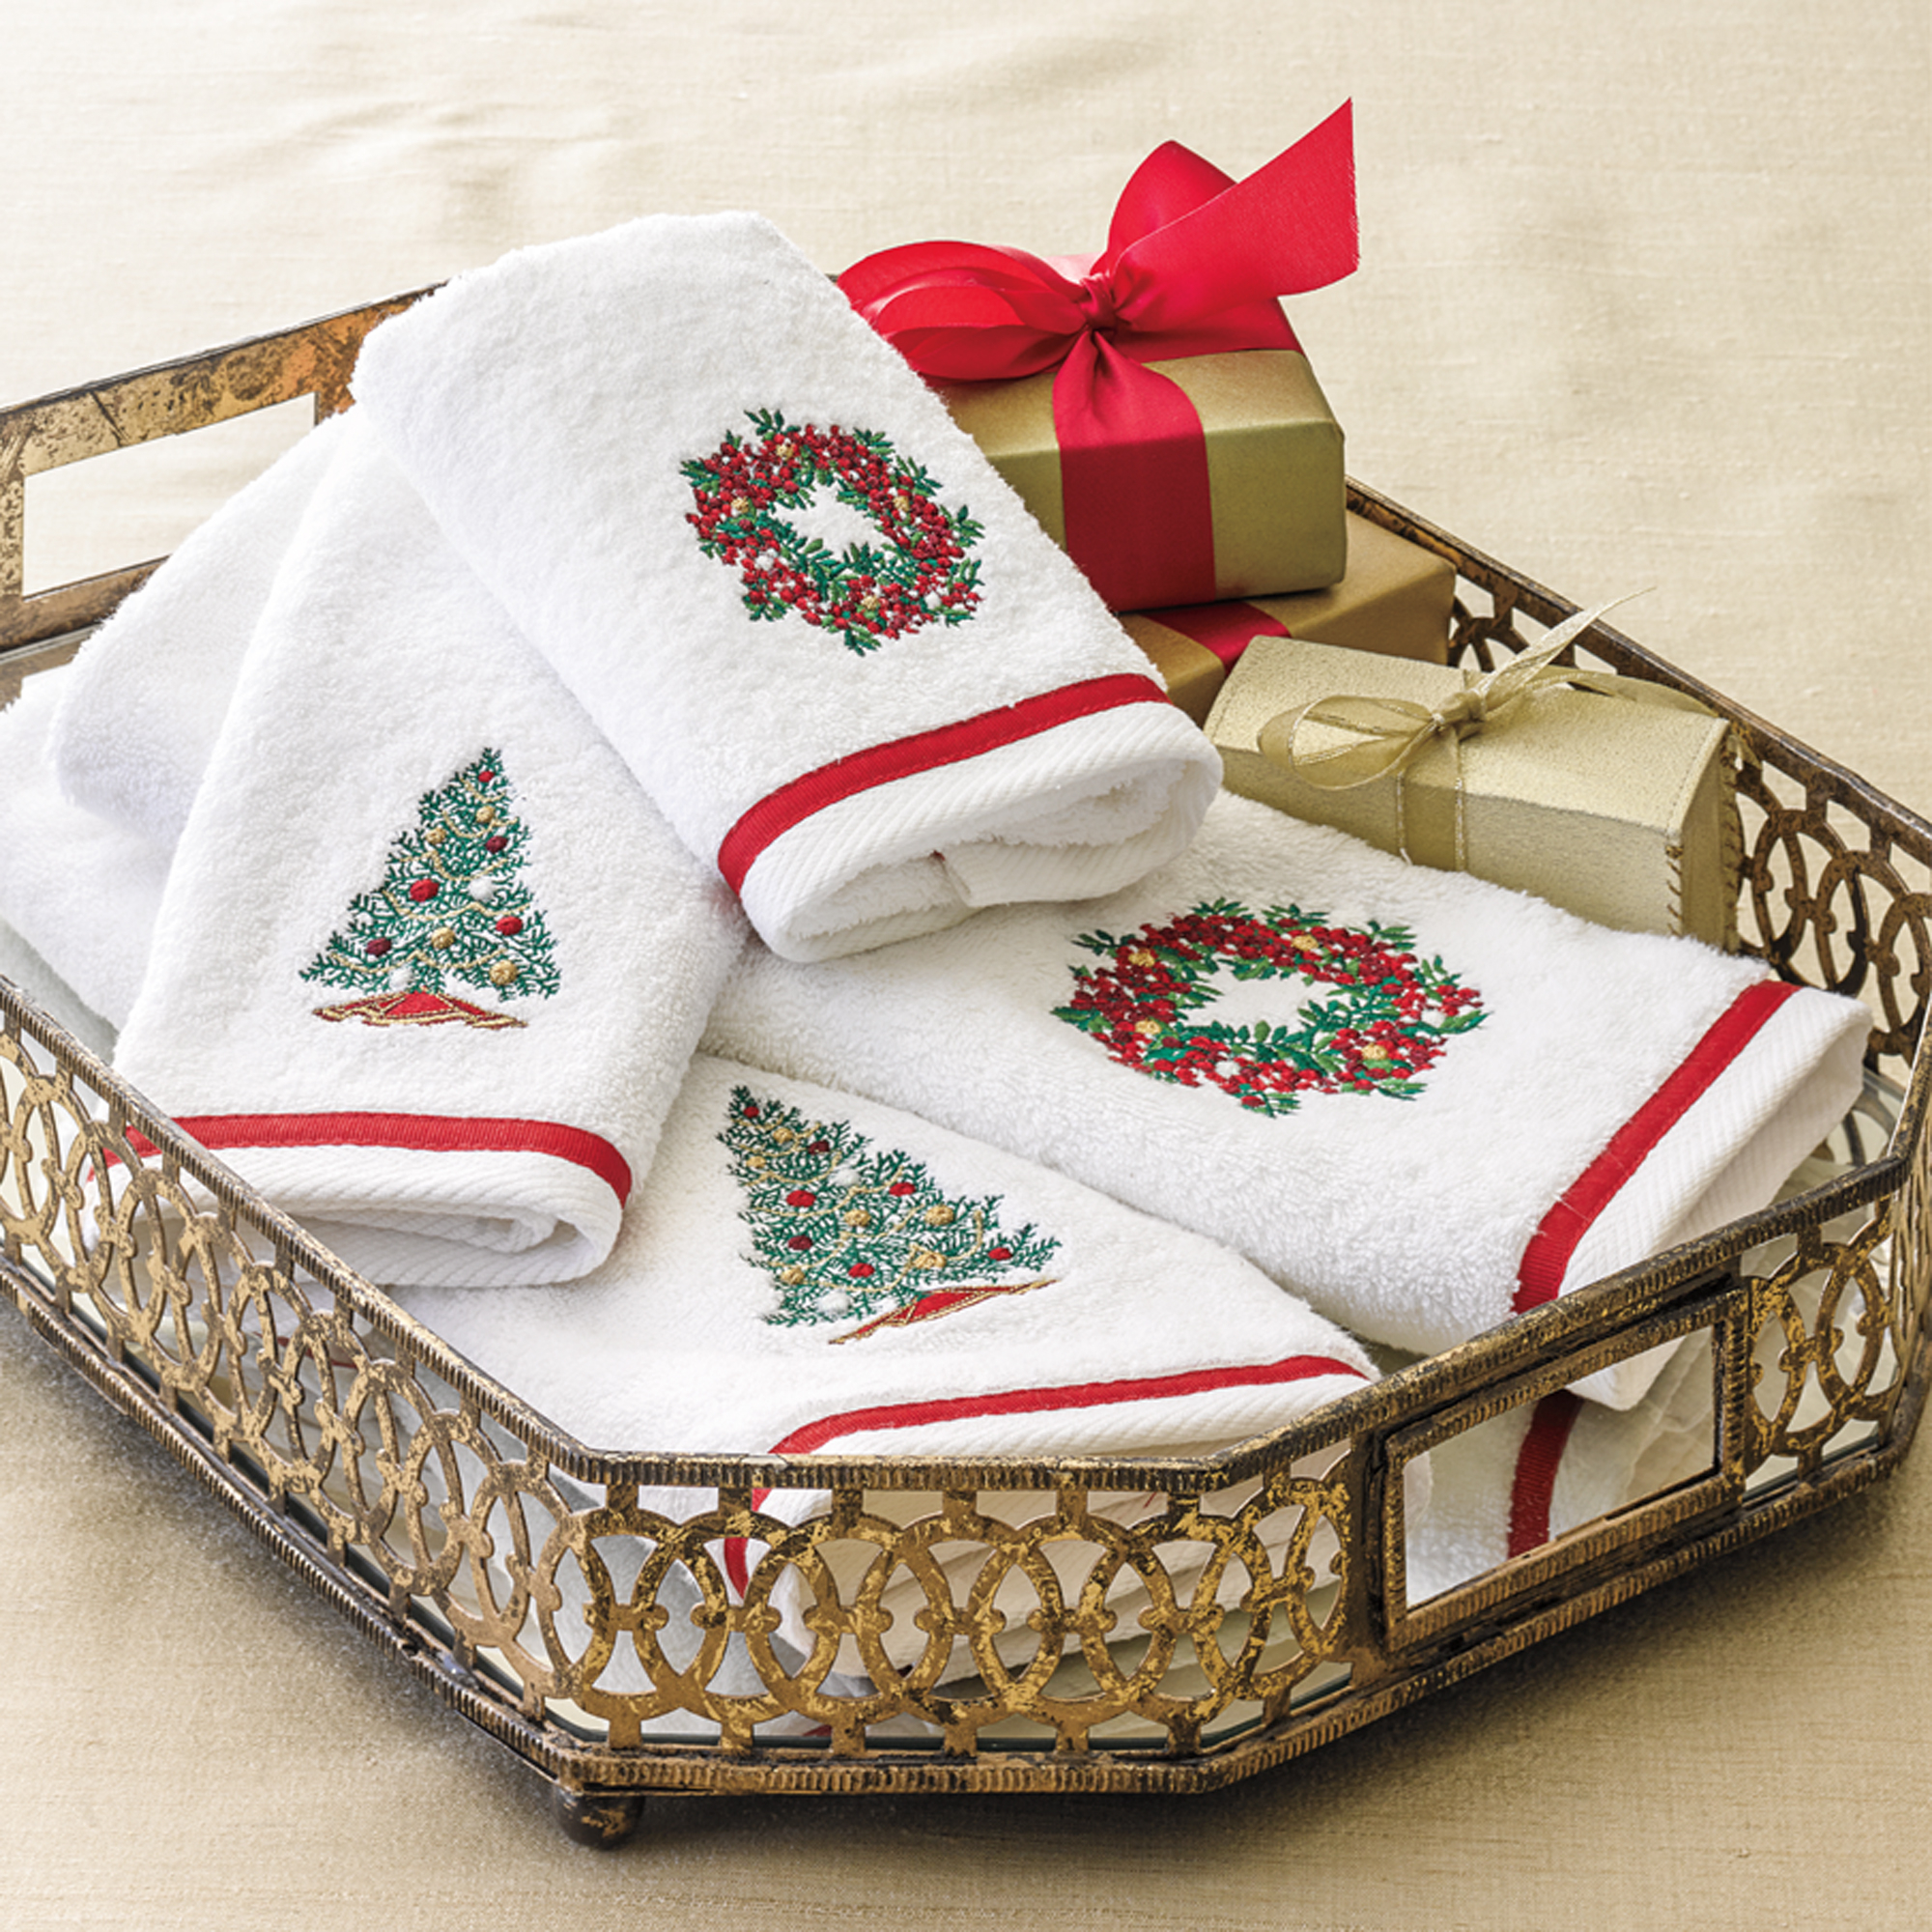 Holiday Guest Towels | Gump's